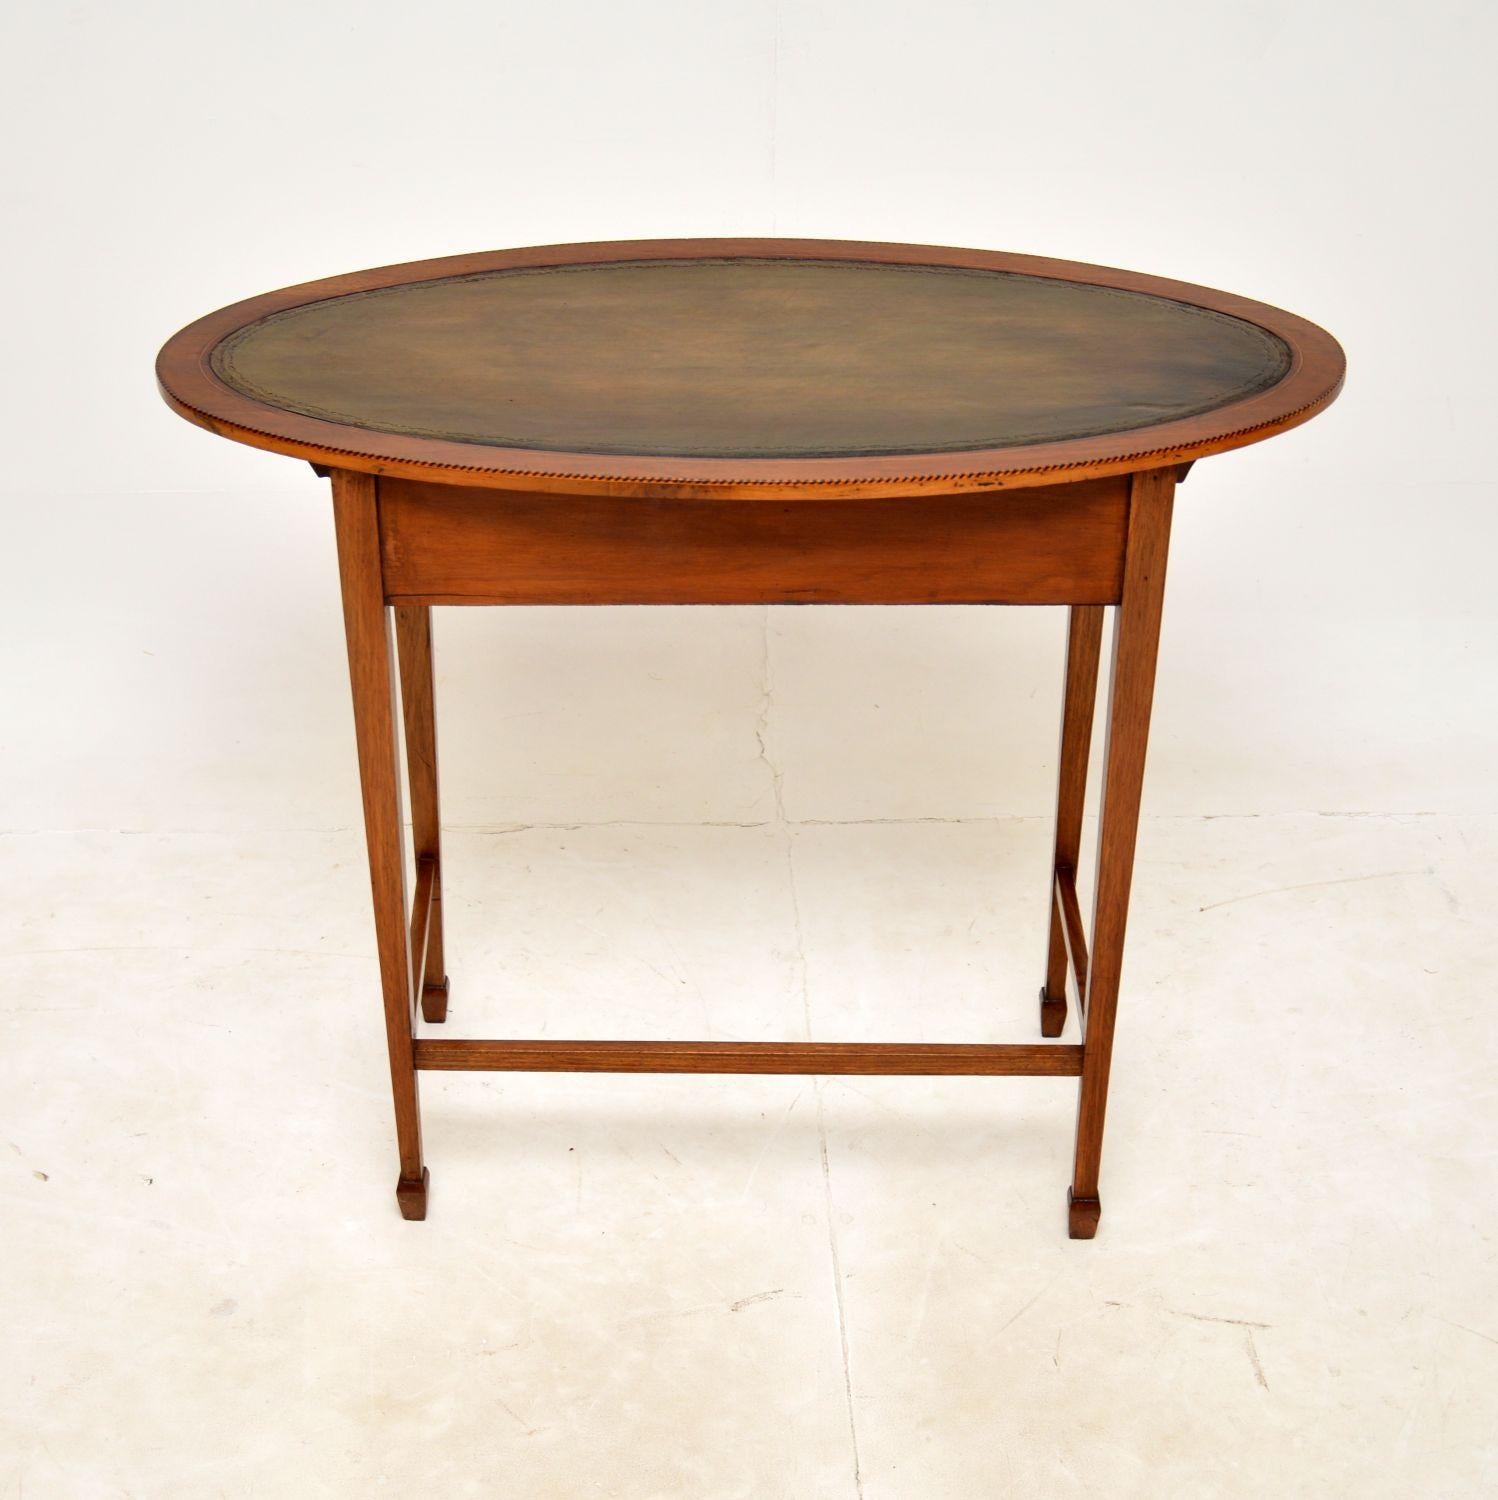 Late 19th Century Antique Edwardian Inlaid Writing Table / Desk For Sale